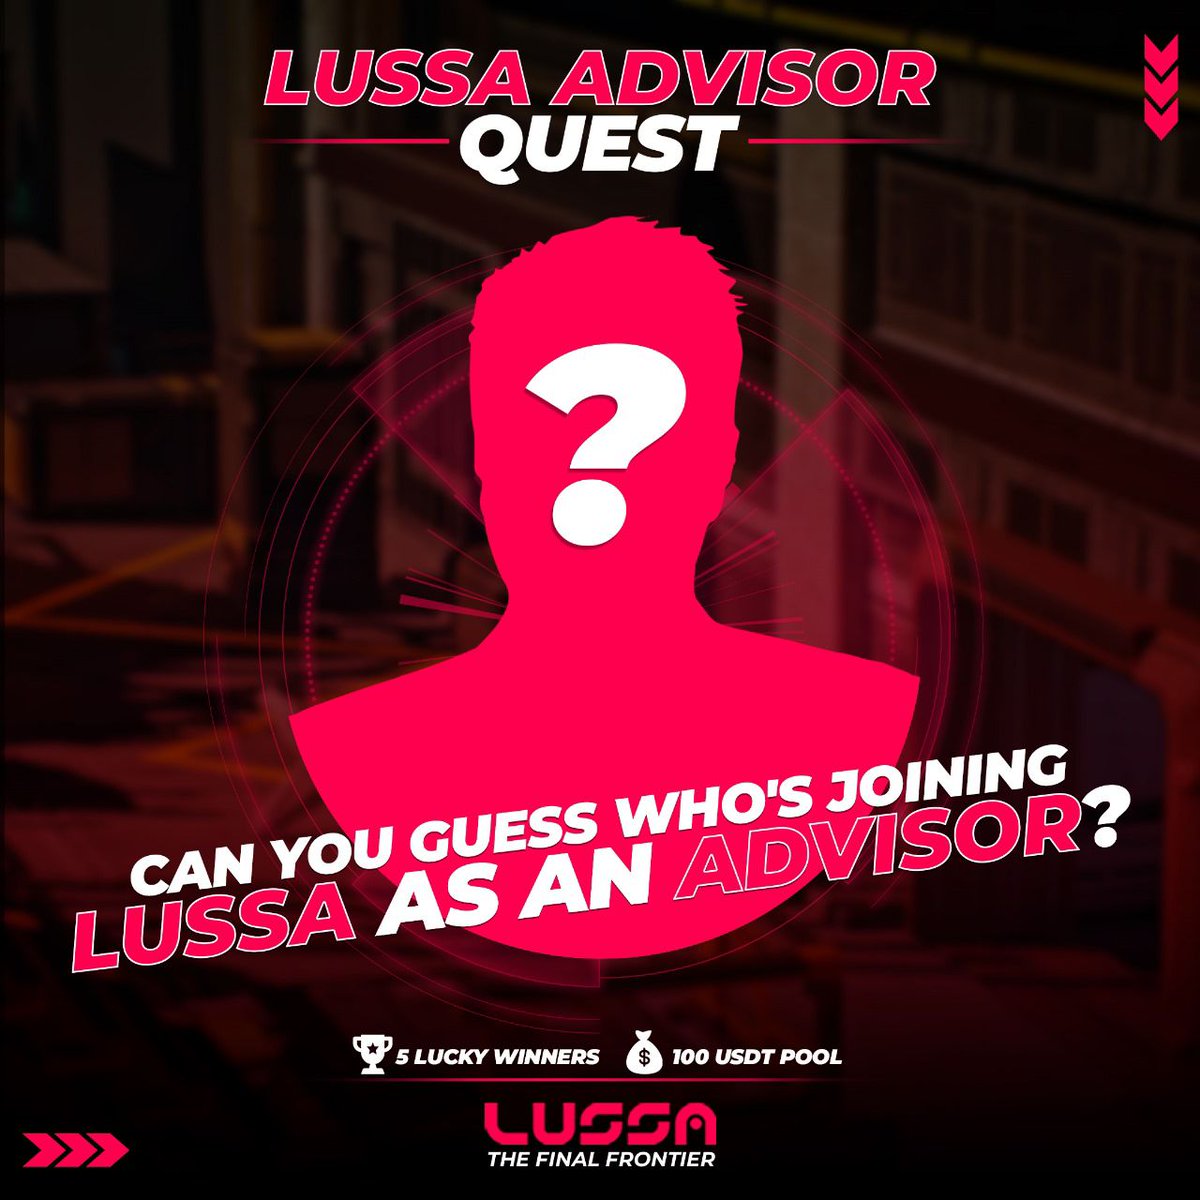 🚀 Exciting news! Can you guess who's joining Lussa as an advisor? Take our quiz for a chance to win!

🏆: 5 Lucky Winners
💰: $100 USDT Pool
⌛️: 36 Hours

Drop your guesses below for the big reveal! 🚀
#LussaAdvisor #GameChanger #BlockchainGaming

QT#1 Luxury car marketer turned…